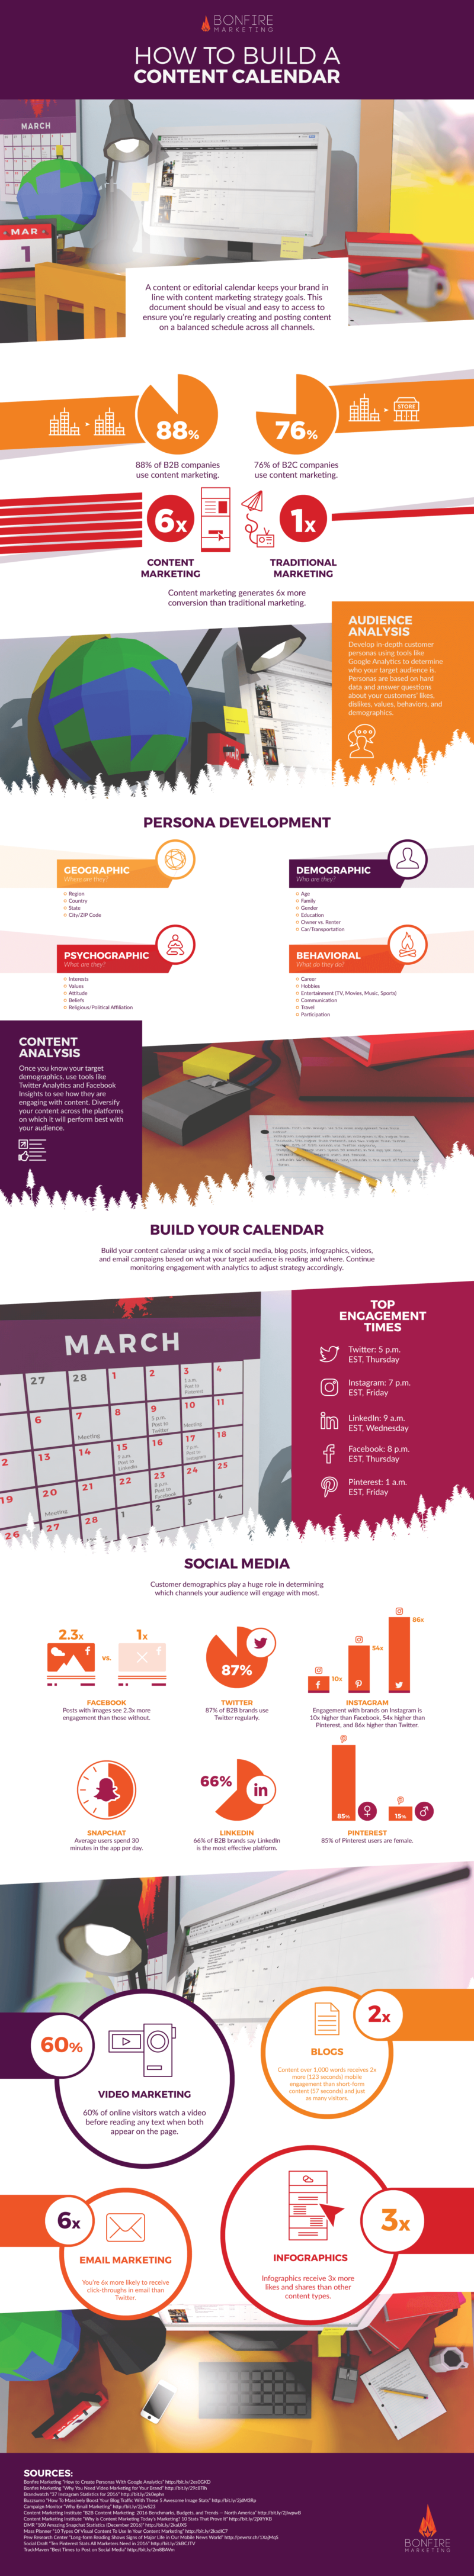 Content marketing is nothing without strategy. Discover the benefits of content calendars, and how to create one for your brand.